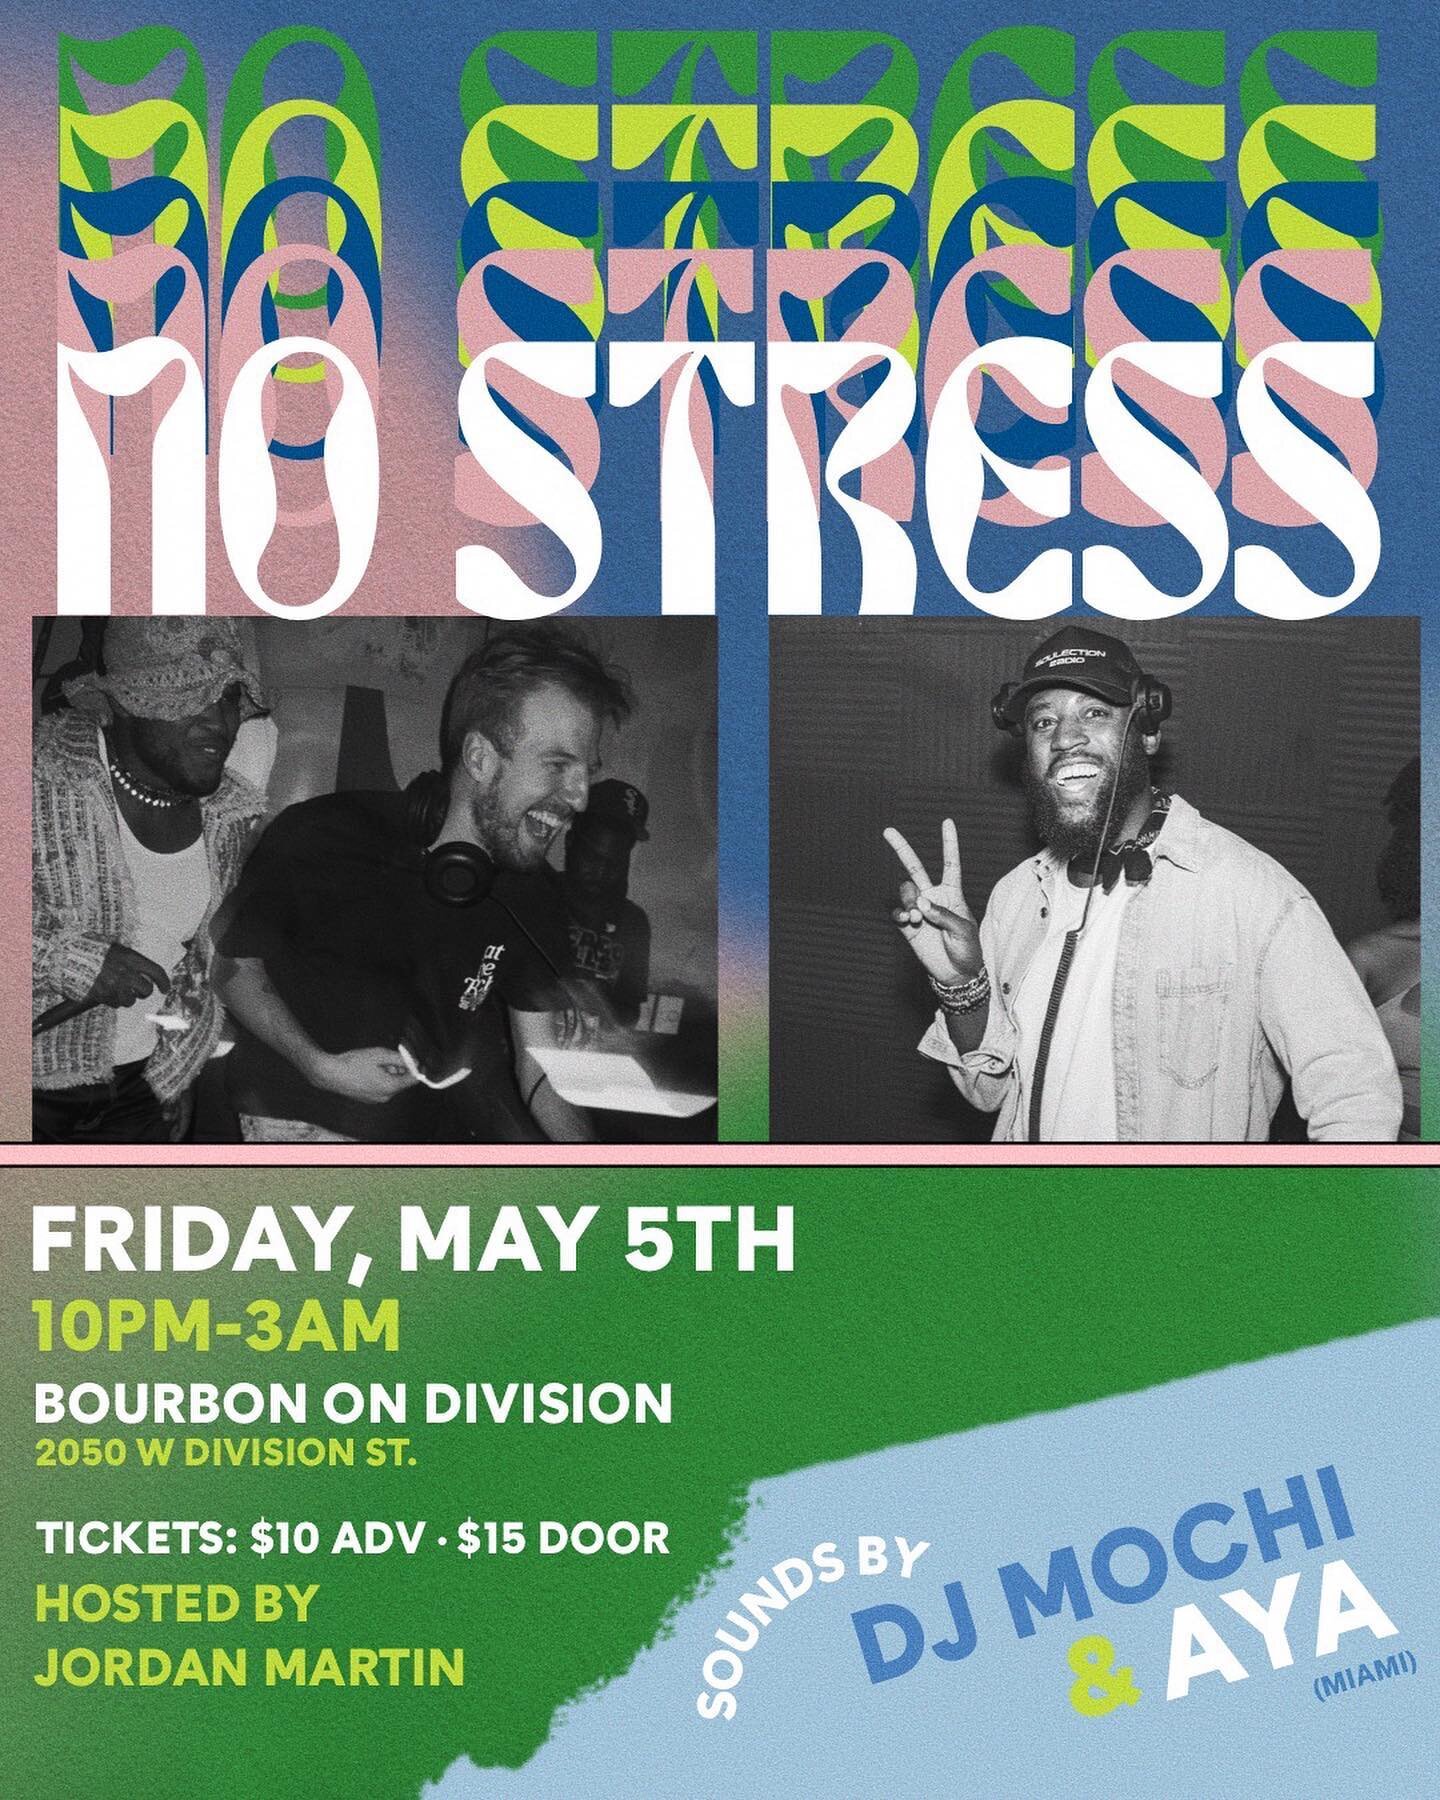 🫡No Stress-ness! Next Friday we&rsquo;re back for our @bourbonondivision takeover 💥

Sounds by me + @manlikeaya (Miami). @realjordanmartin on hosting duties. Tix available now for just $10.